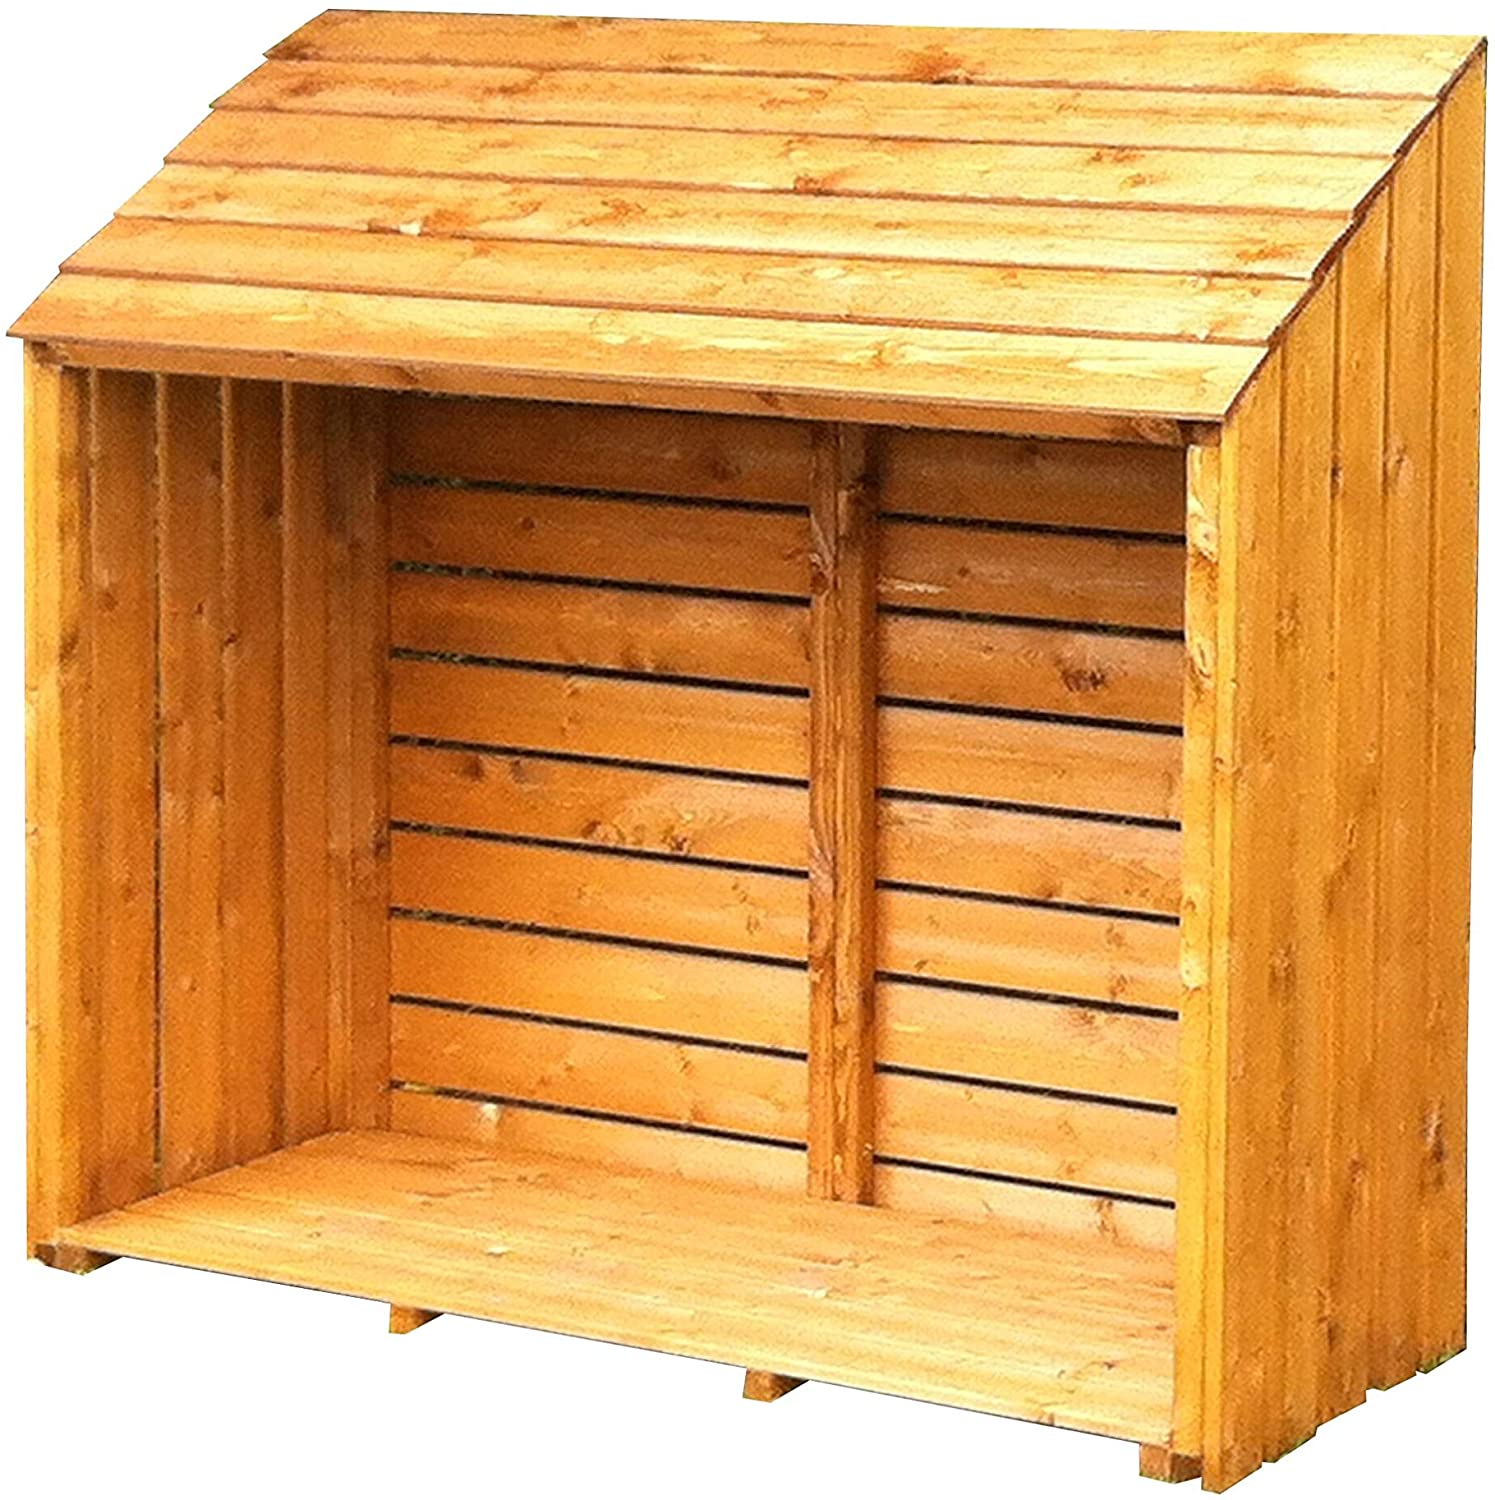 Shire 5 x 2 Small Pent Classic Log Store